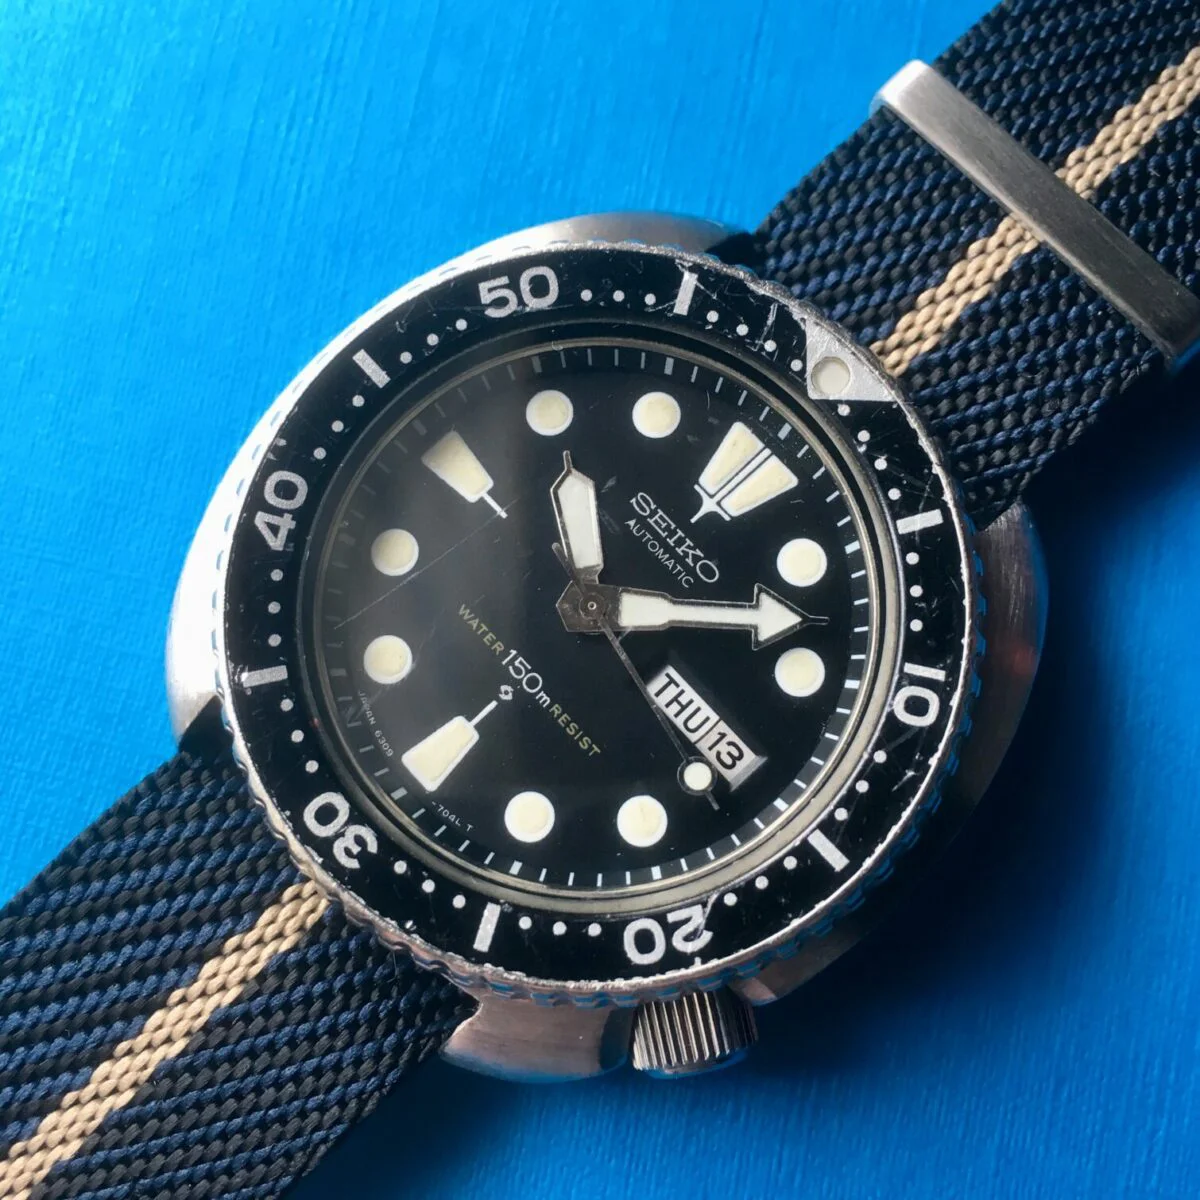 SRPE93] Got a new oyster bracelet for my turtle, loving it! : r/Seiko